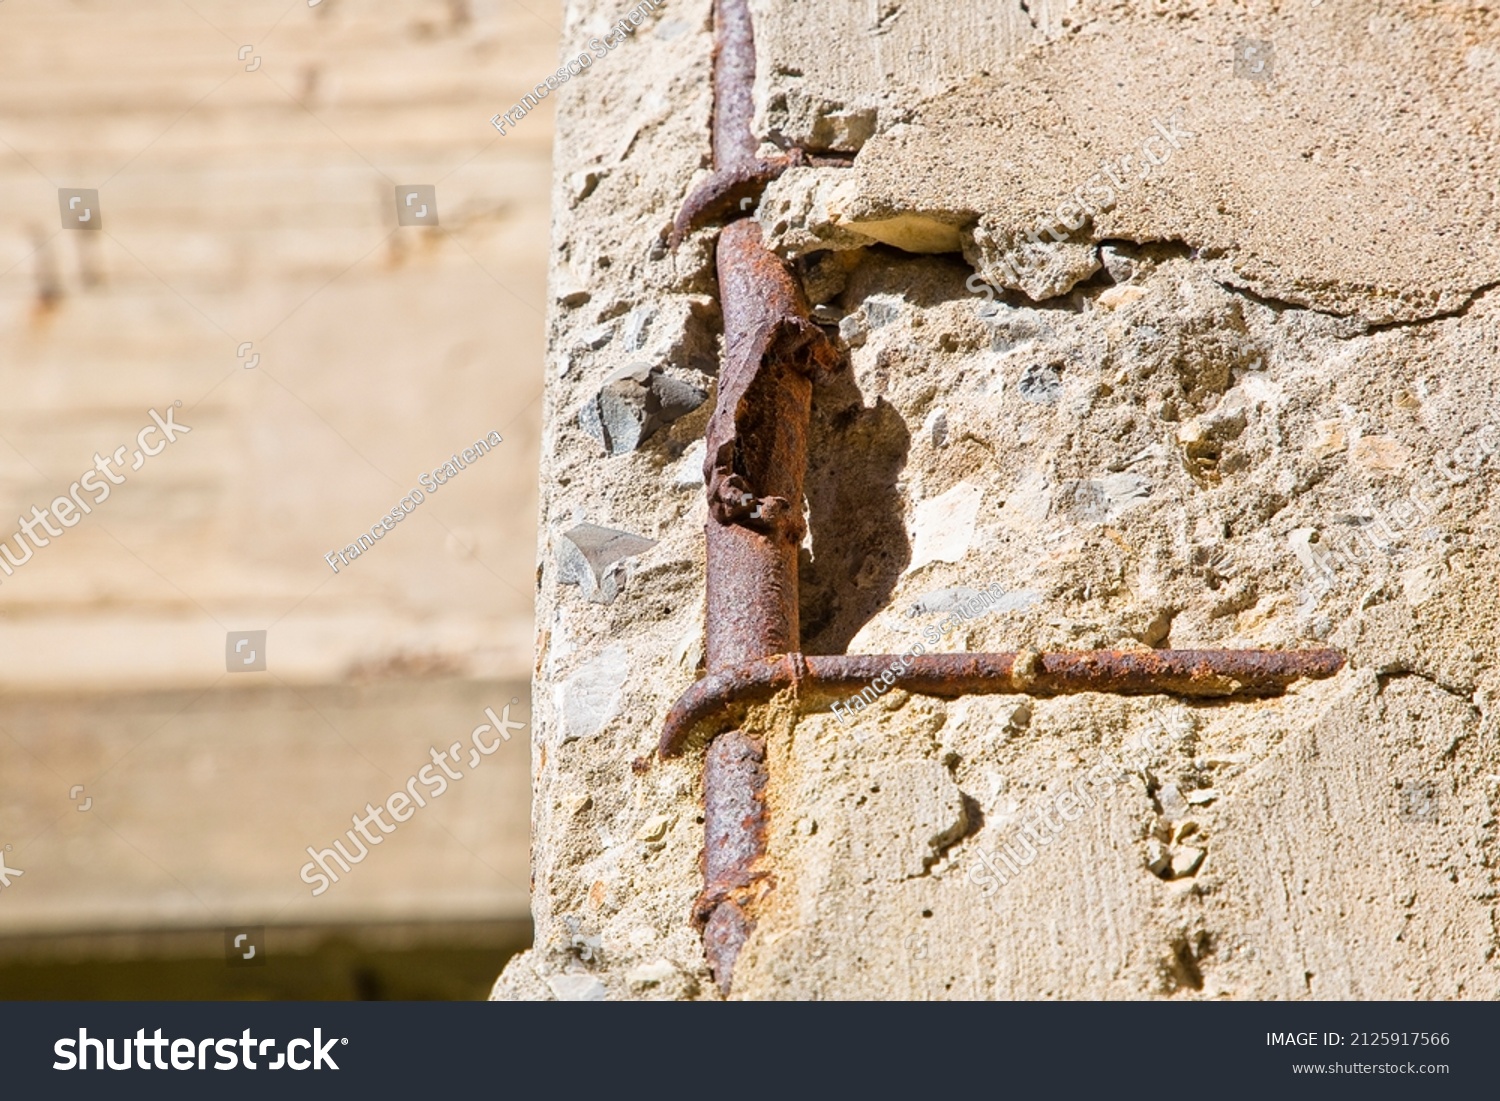 Old reinforced concrete structure with damaged and rusty metallic reinforcement bars. #2125917566